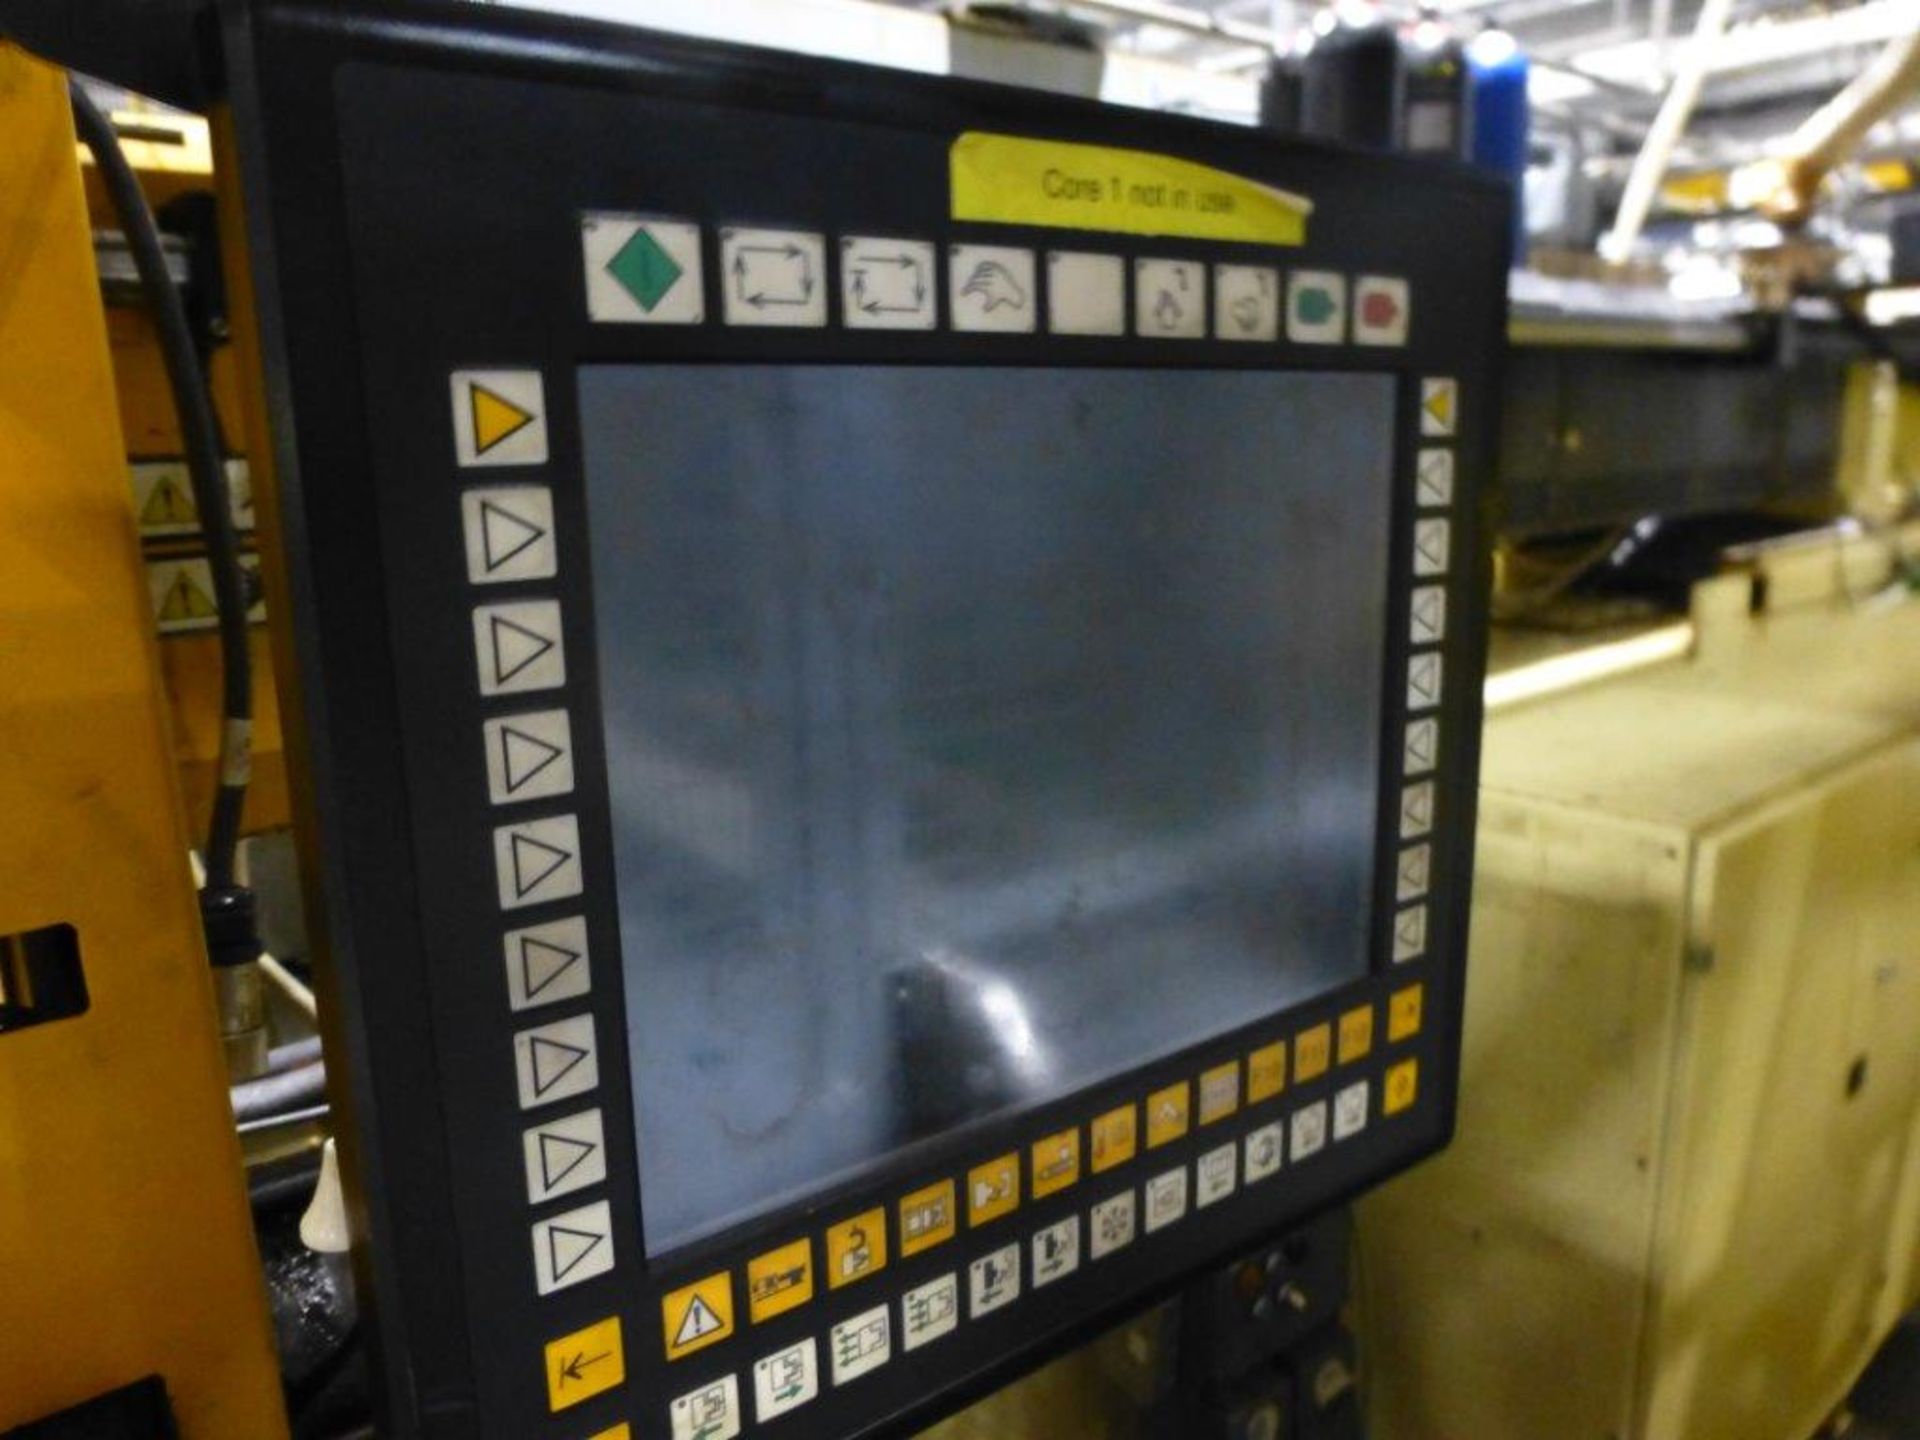 Husky H400 RS115 1200 CNC plastic injection moulding machine Serial No. 2640094 (2003) with 400 - Bild 4 aus 6